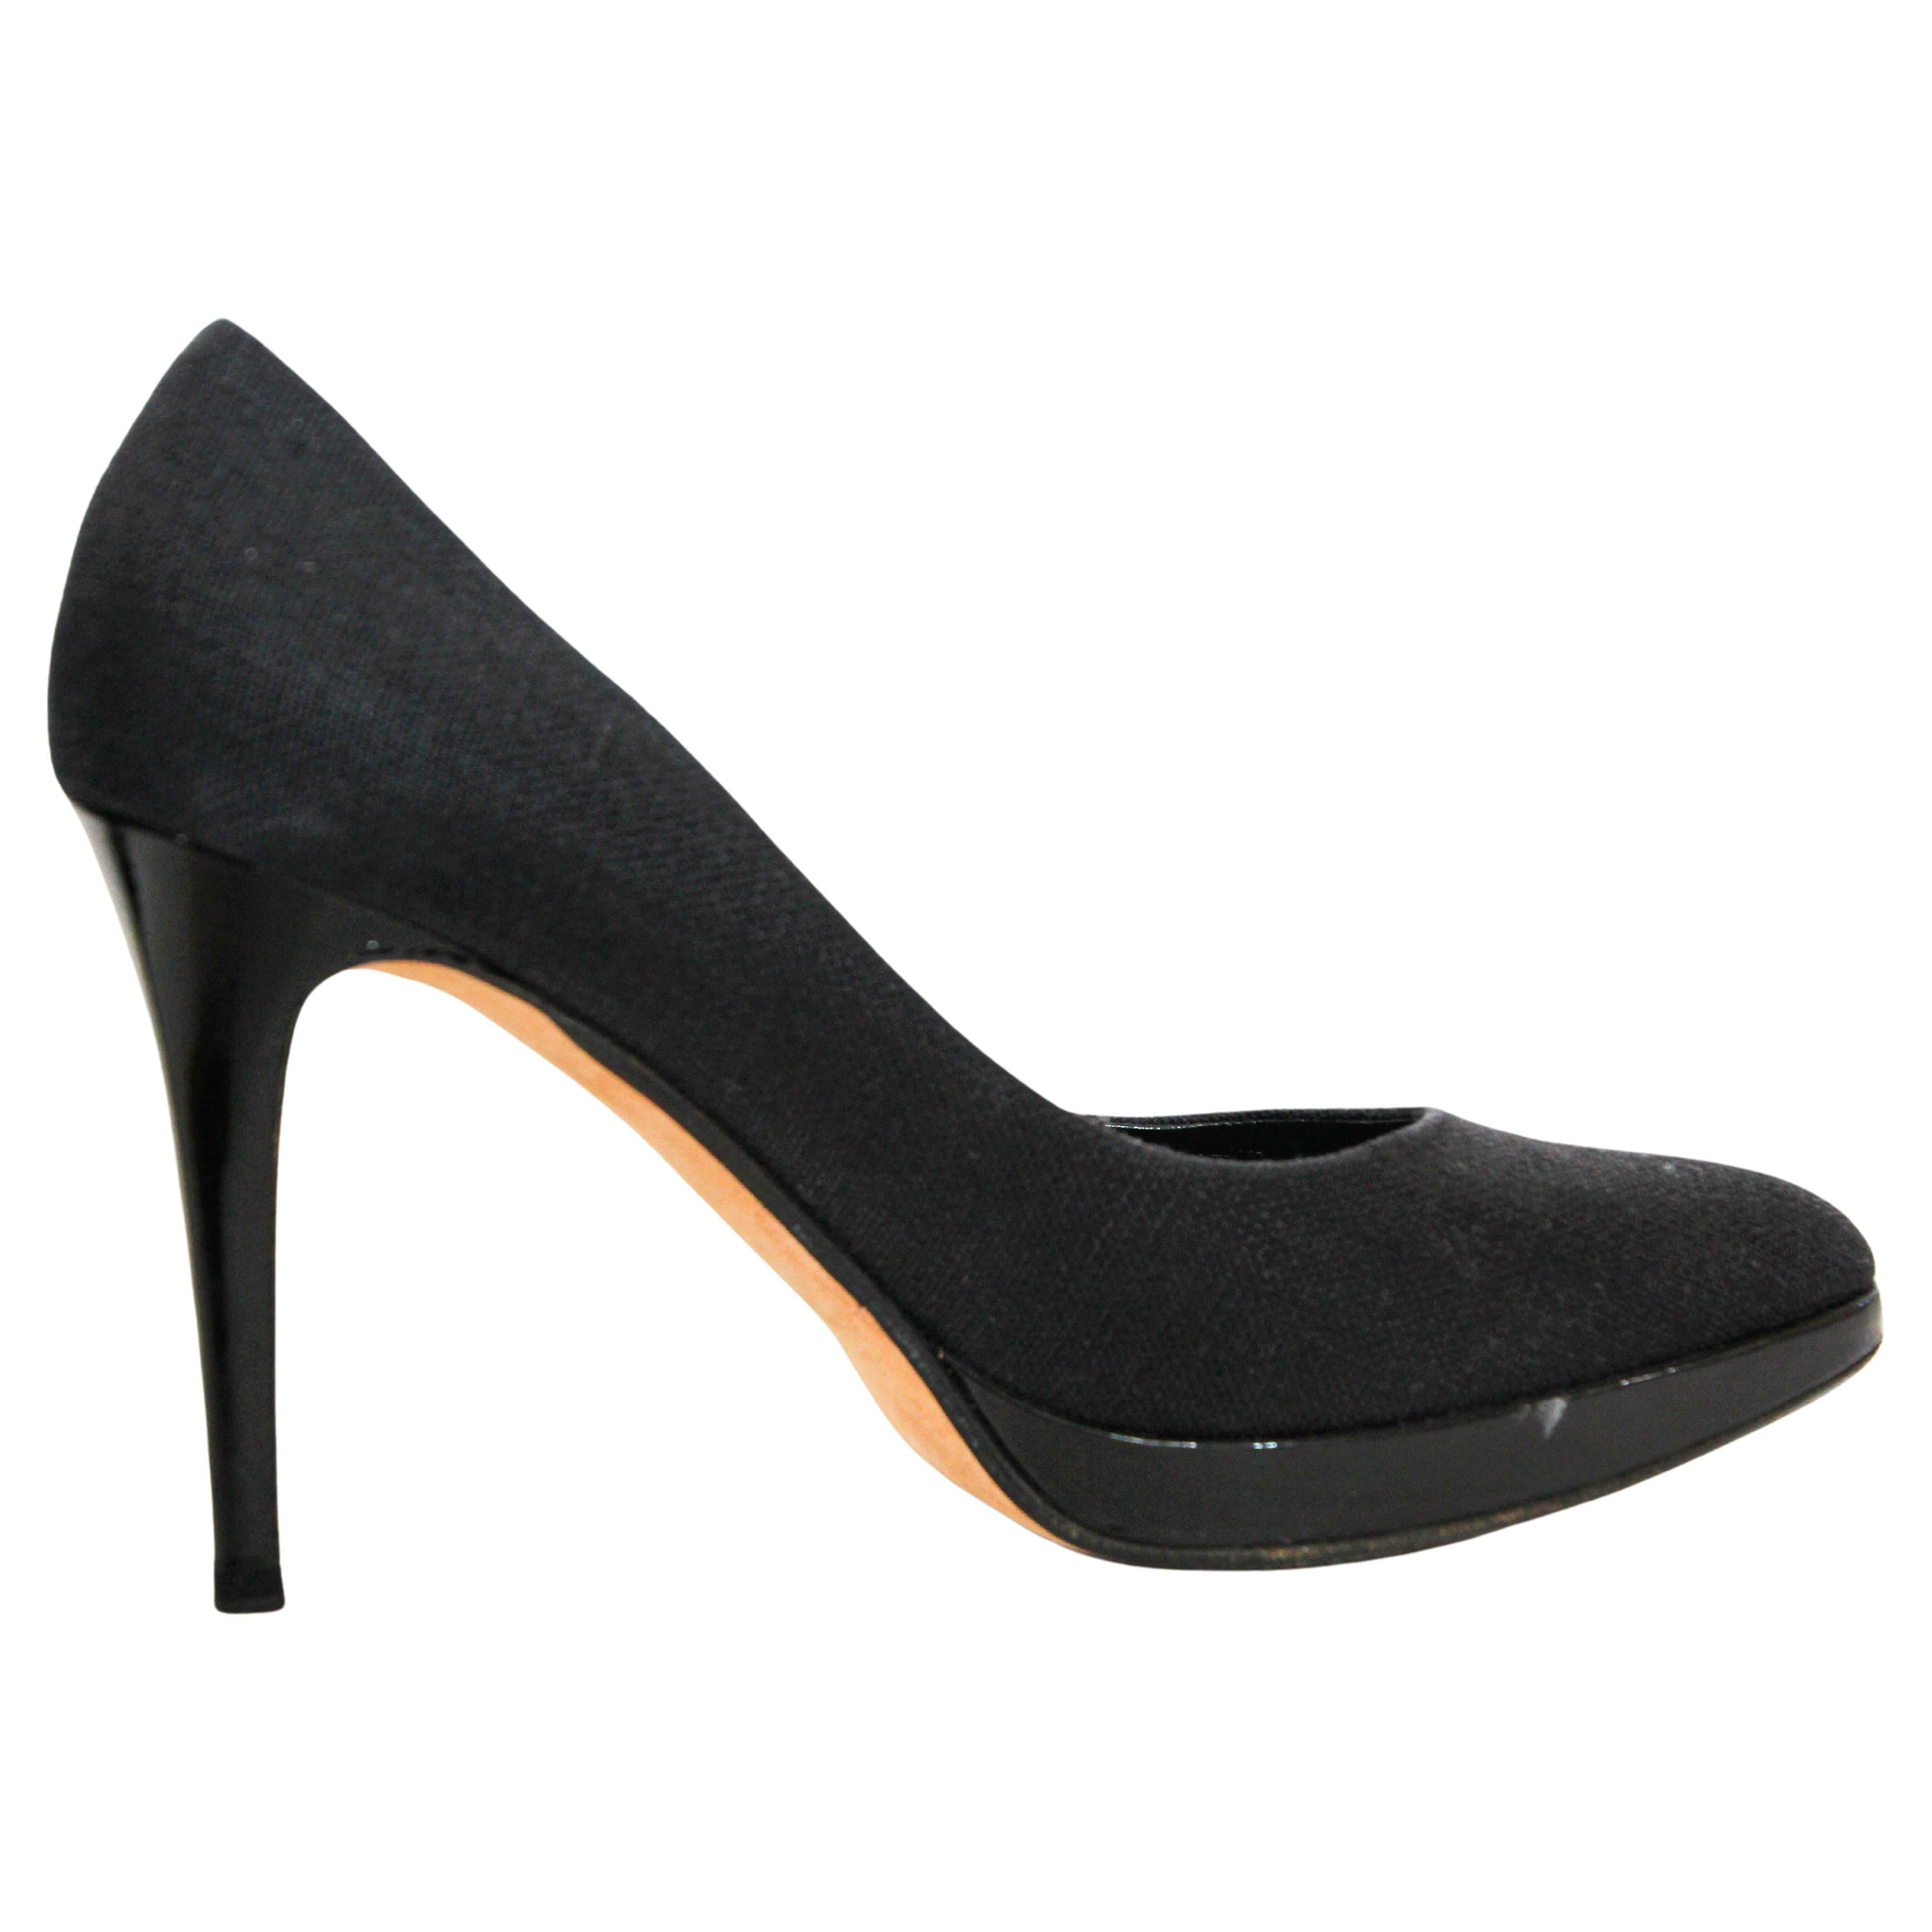 RALPH LAUREN Purple Label Celia wool stiletto pumps.
Look your best with the Ralph Lauren Purple Celia classic chic pumps. 
Crafted from sumptuous Italian black wool, this classic stiletto style features a pointed toe. Every detail of the iconic